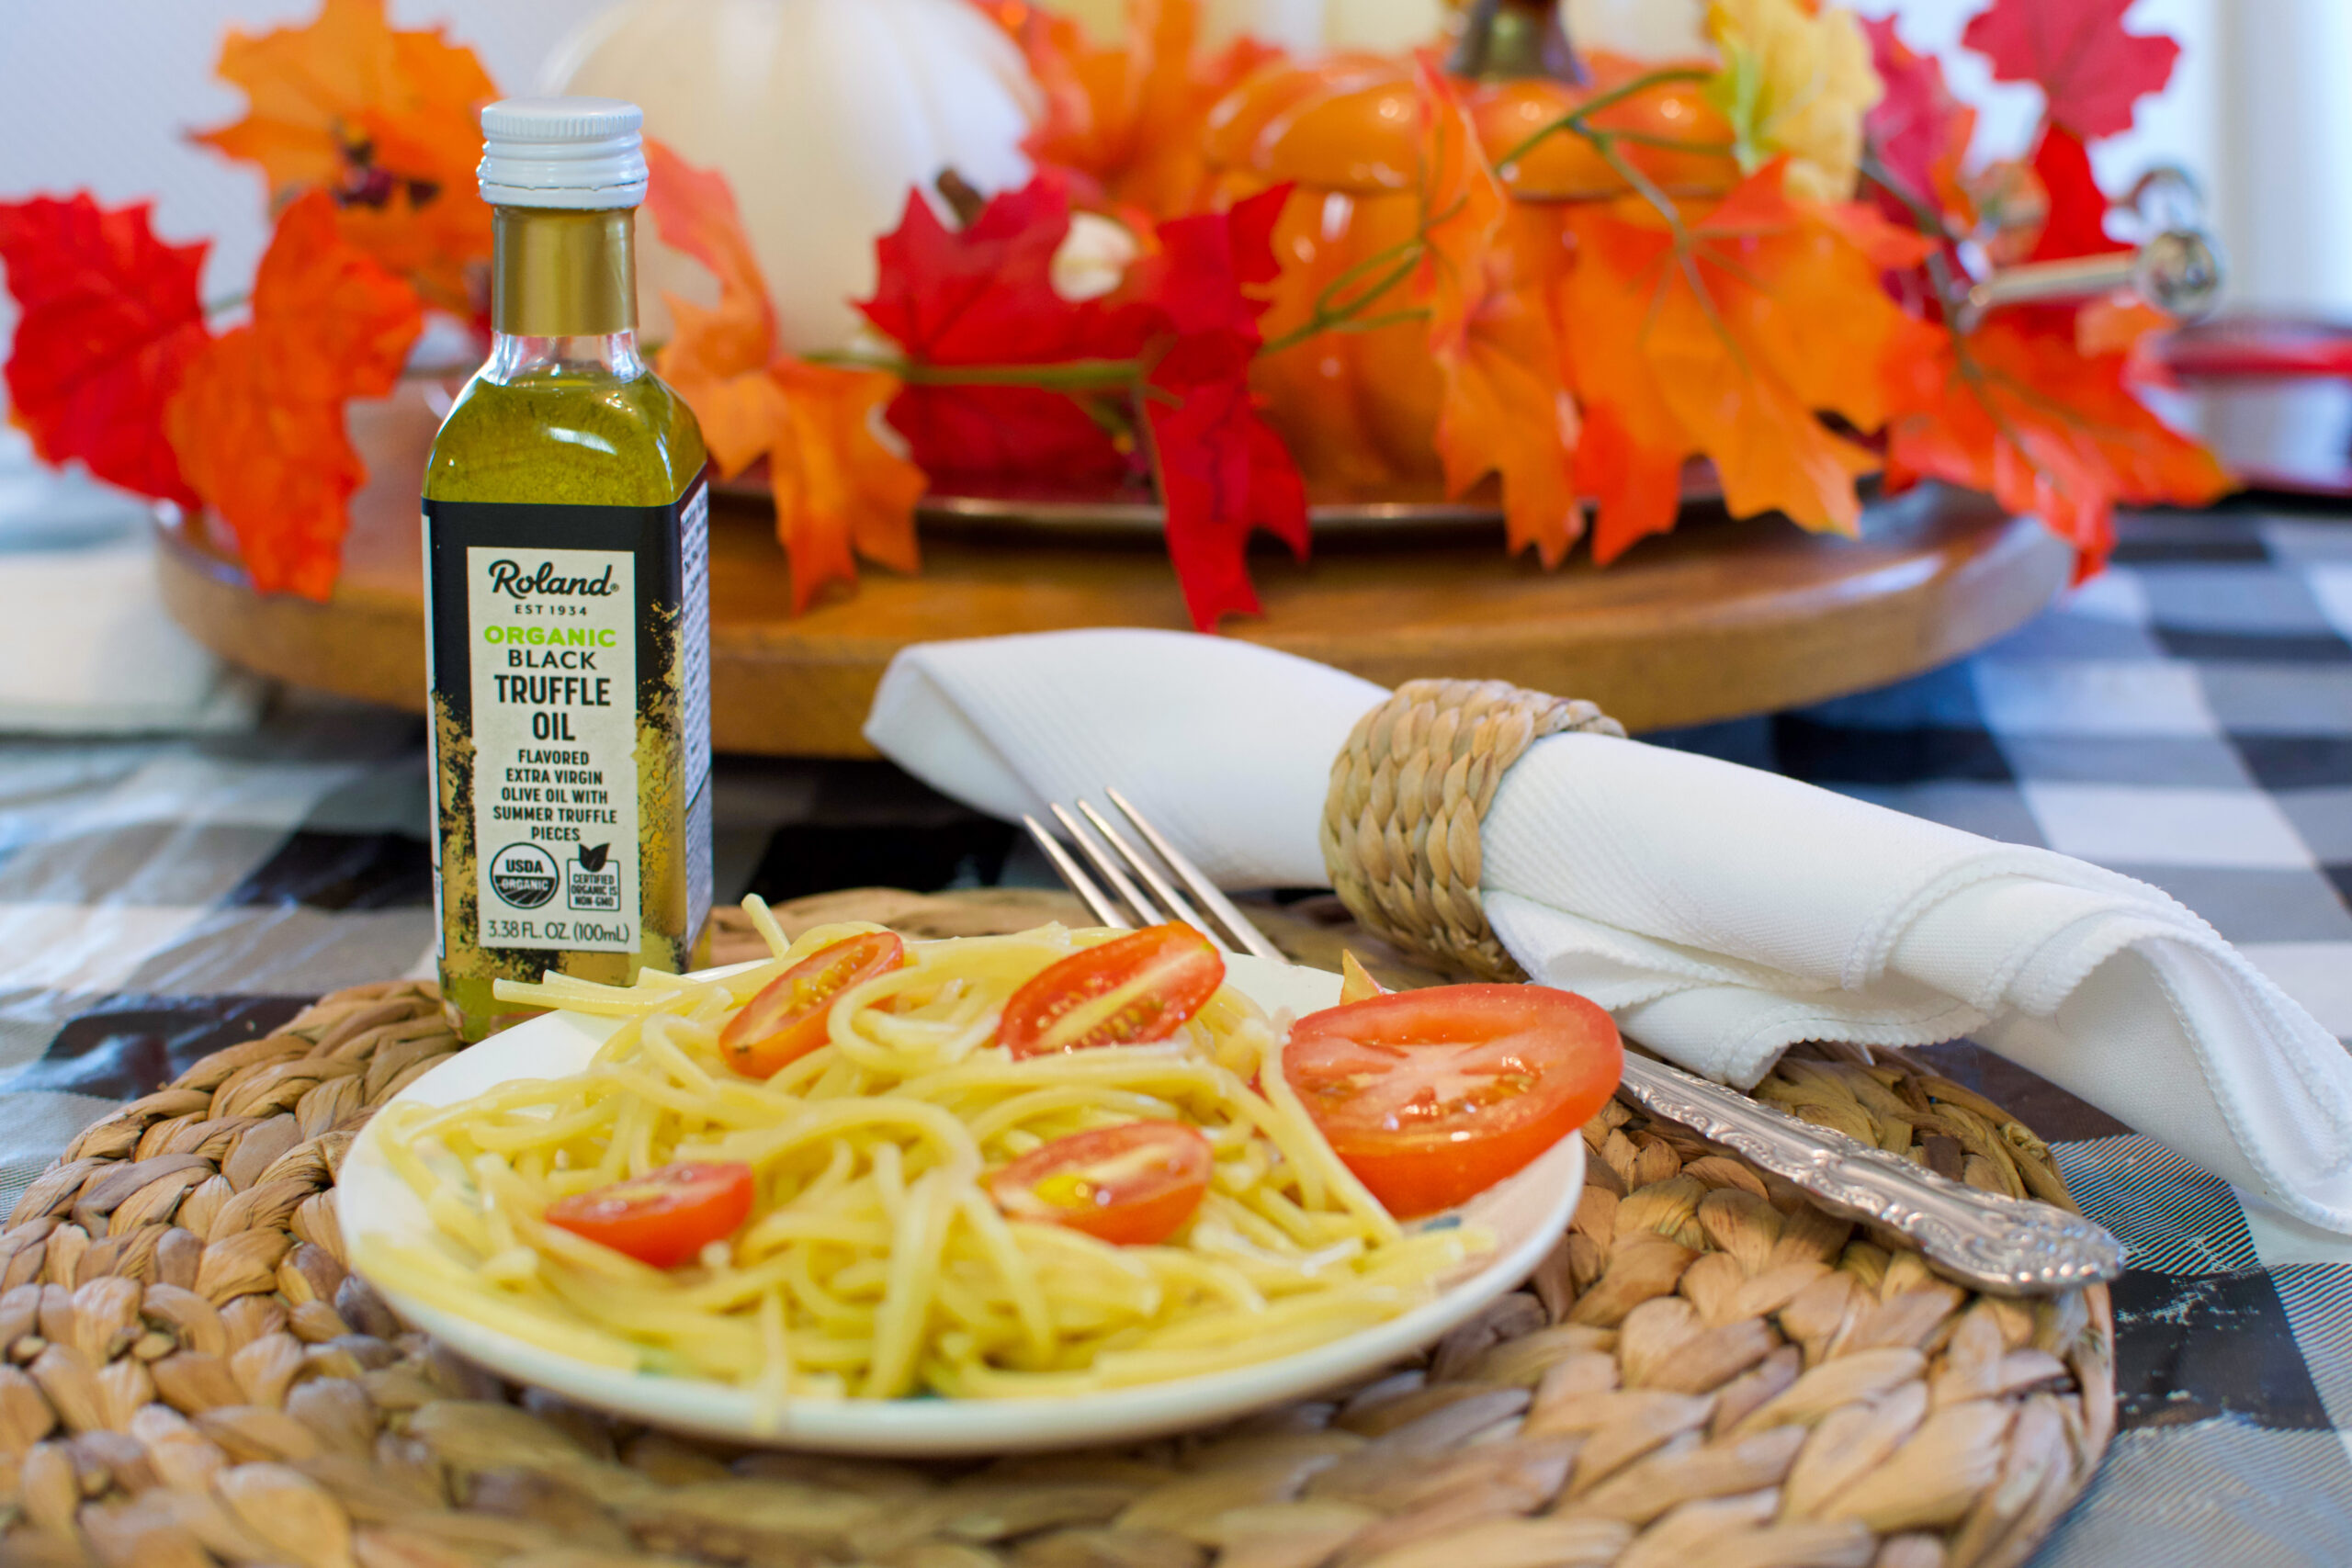 Roland Foods Black Truffle Oil. Homegatig. Tailgating party food